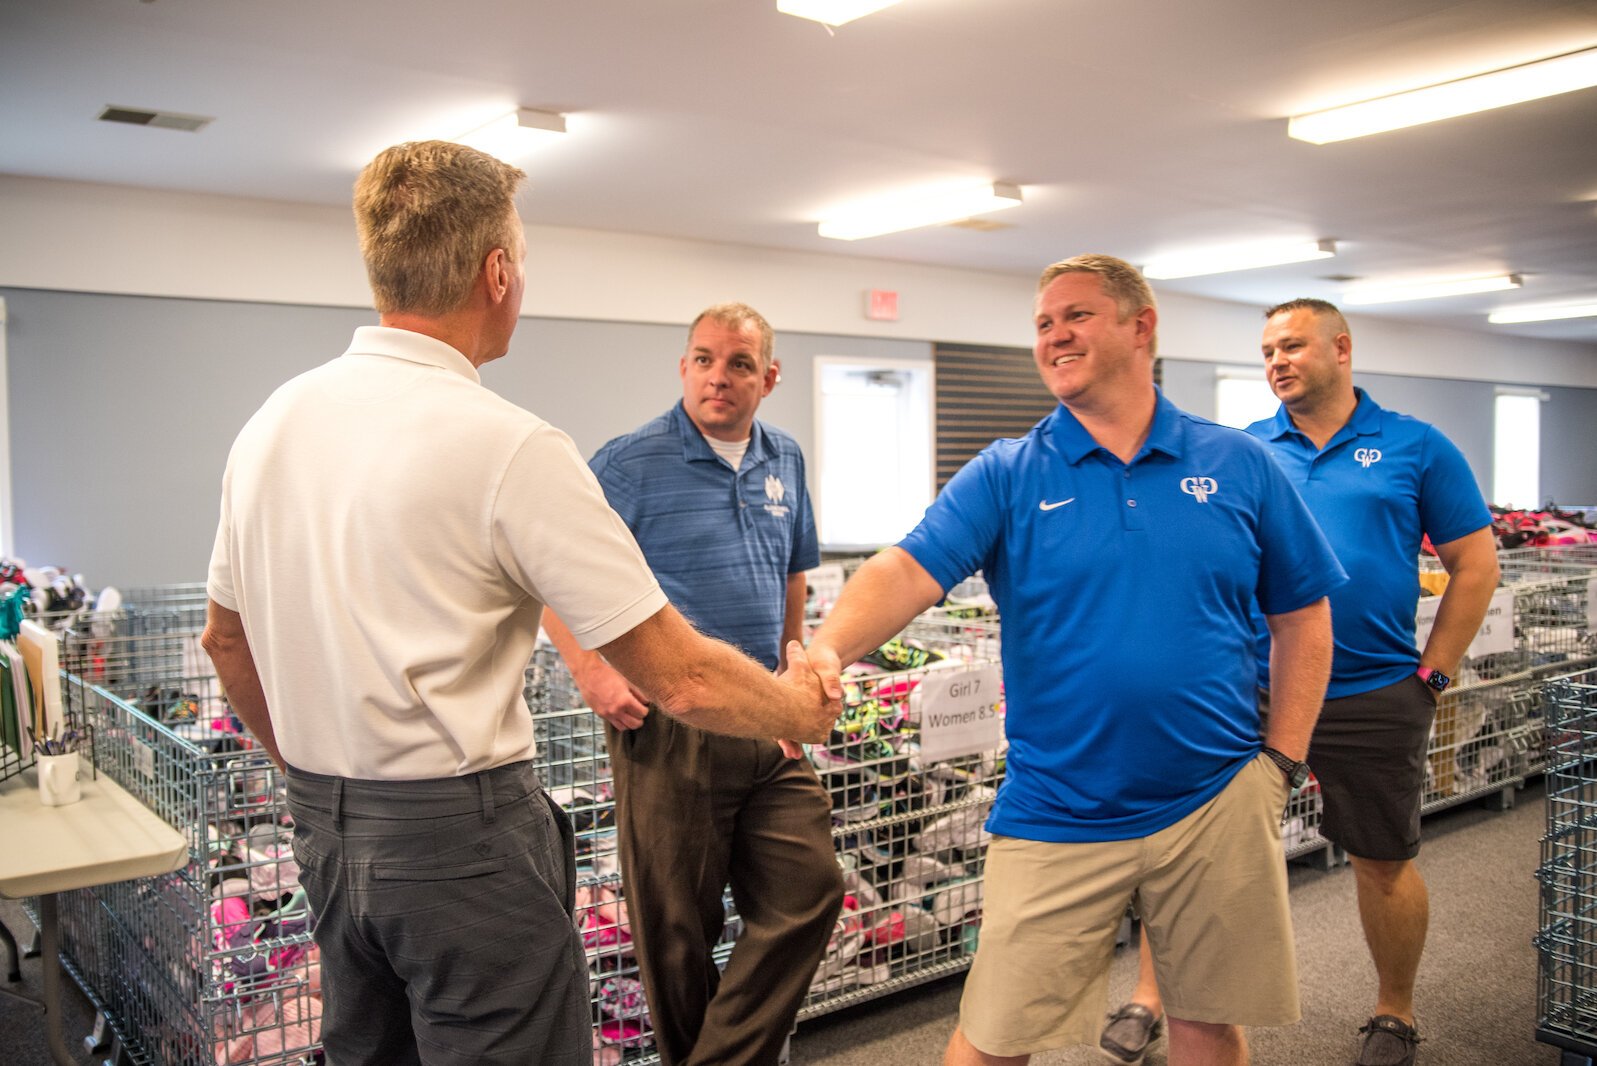 Cody Livingston, president of Guys Who Give – Kalamazoo County, center, shakes hands on Wednesday, June 22, 2022, with group member Scott Everett, in white shirt, after they present a $15,200 donation to First Day Shoe Fund.